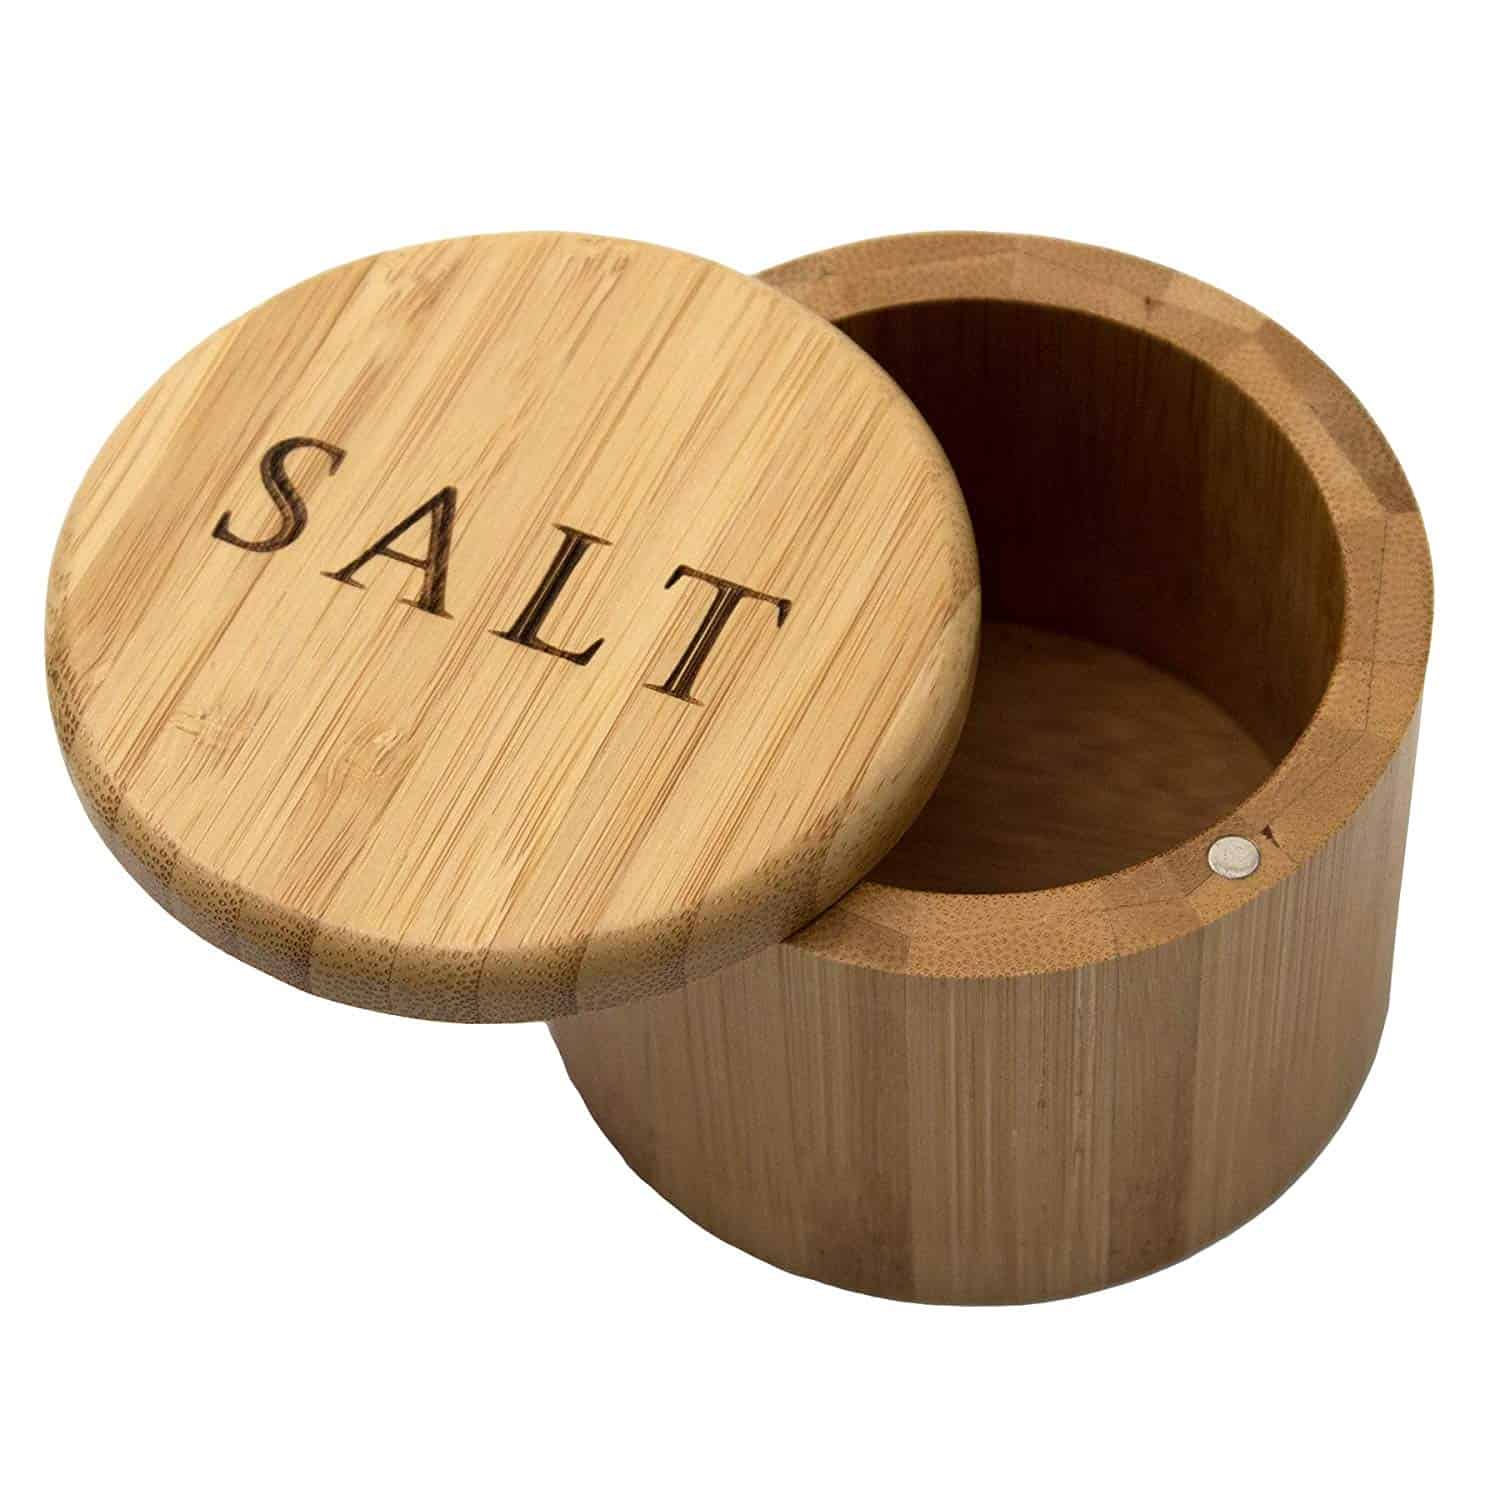 Bamboo Salt Storage Box with Magnetic Lid